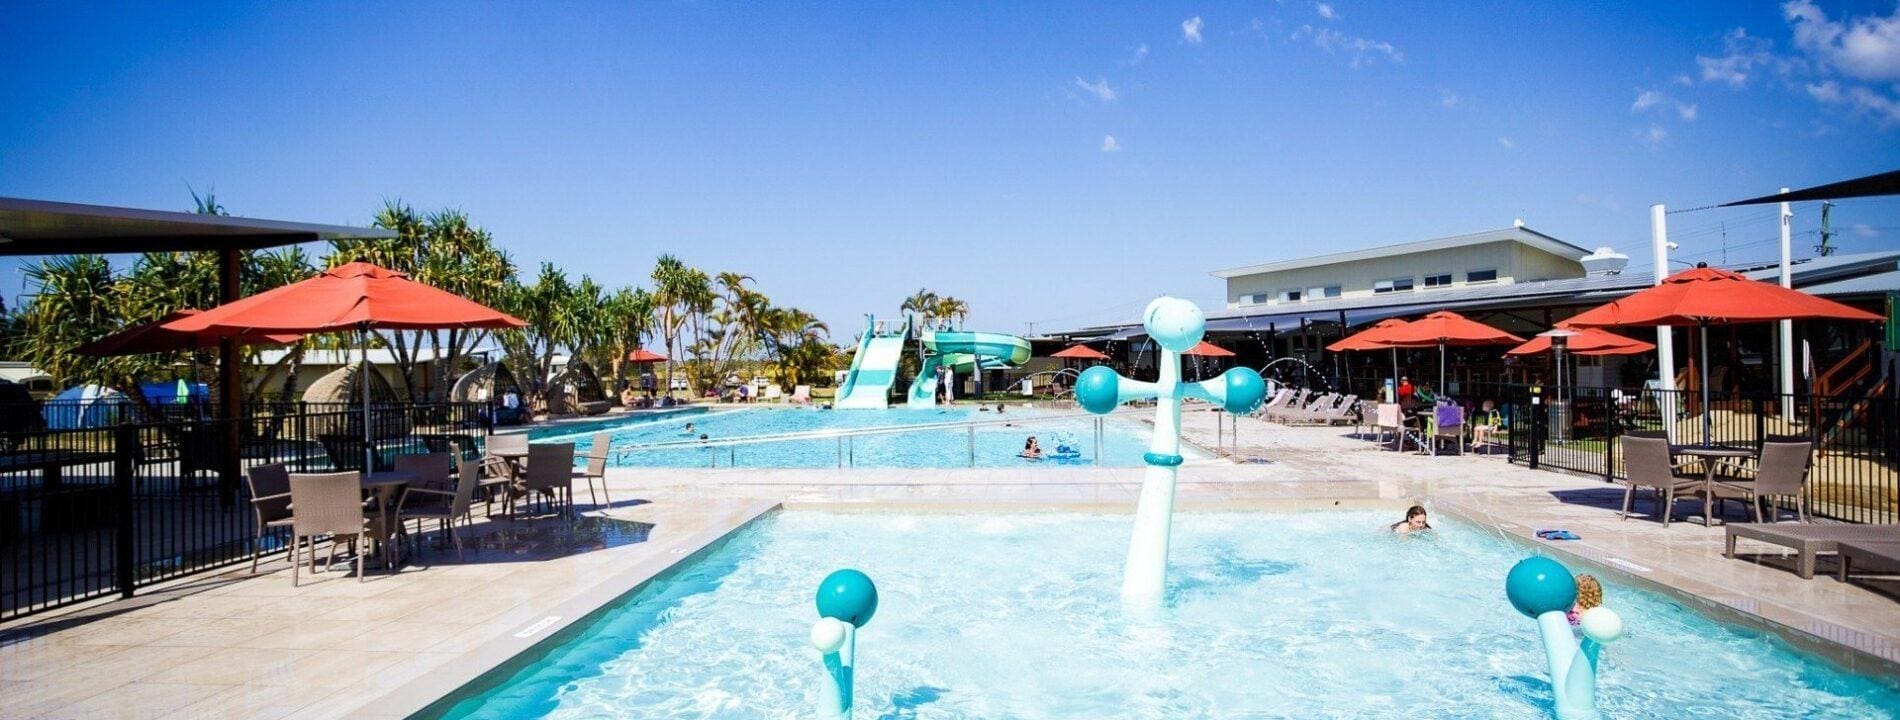 holiday park pool